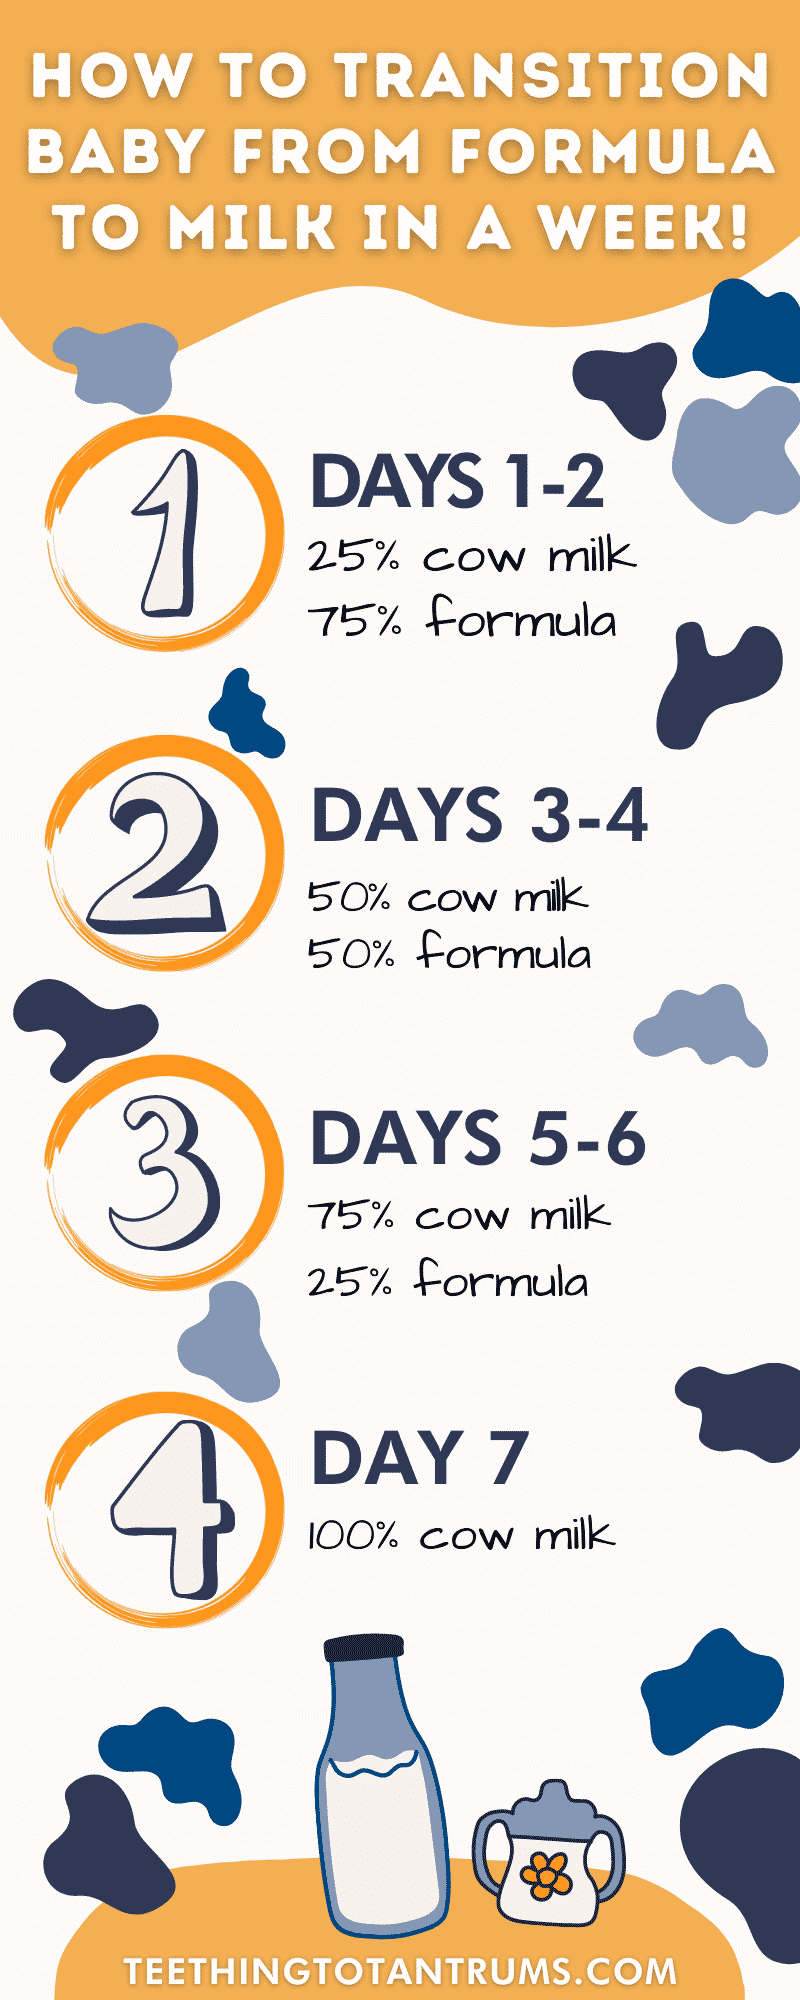 How To Transition From Formula To Milk The 4 Step Process!